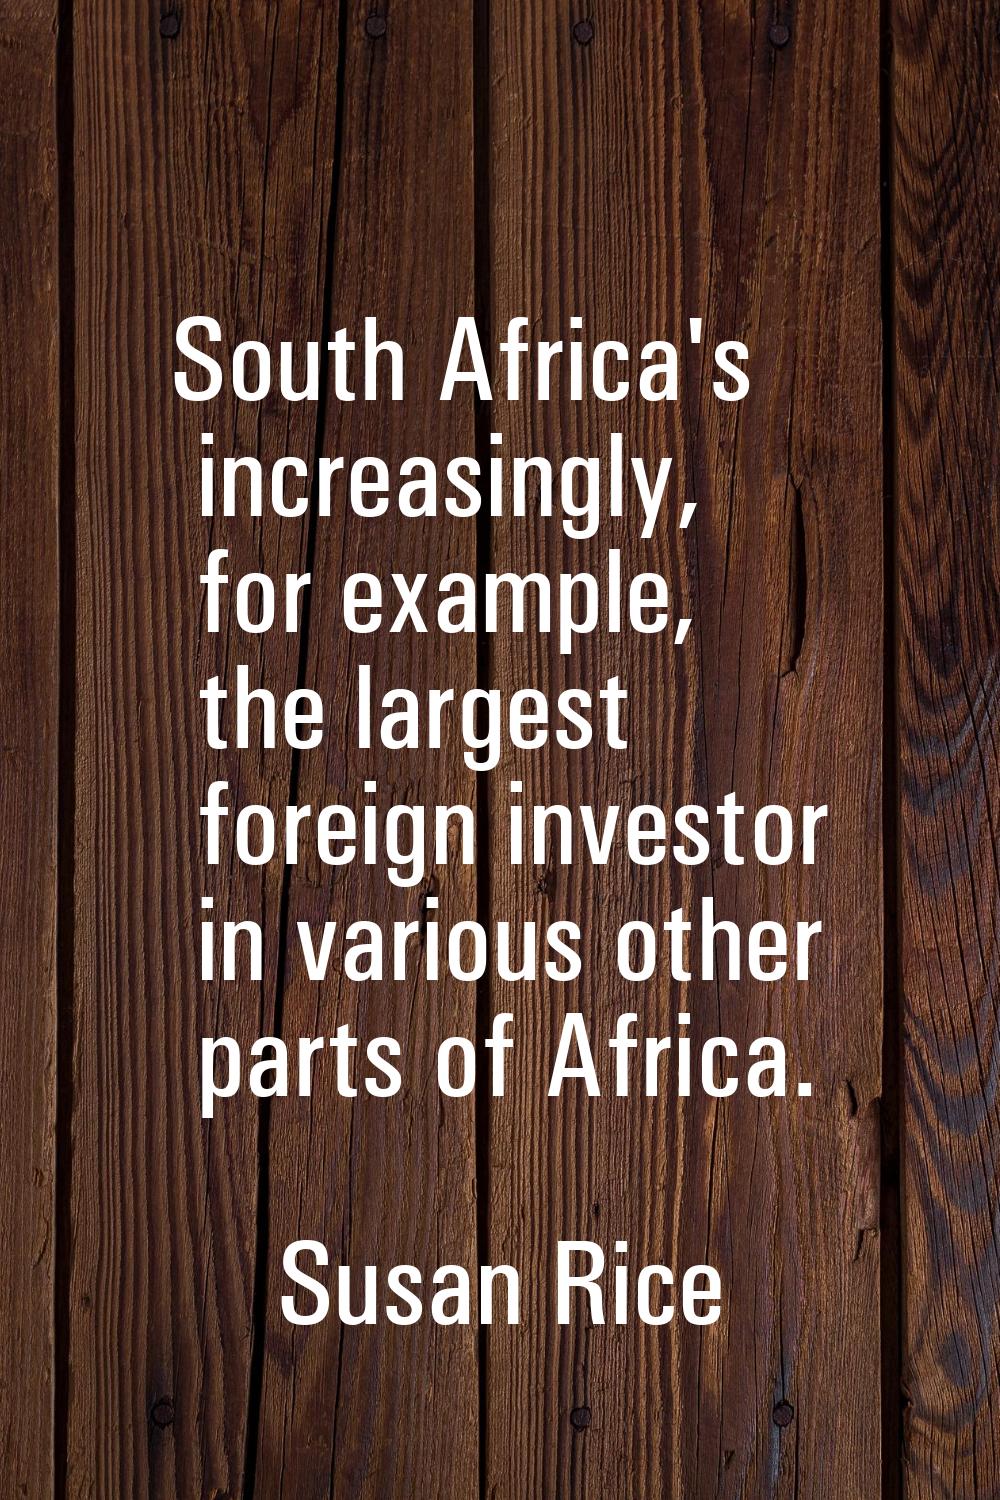 South Africa's increasingly, for example, the largest foreign investor in various other parts of Af